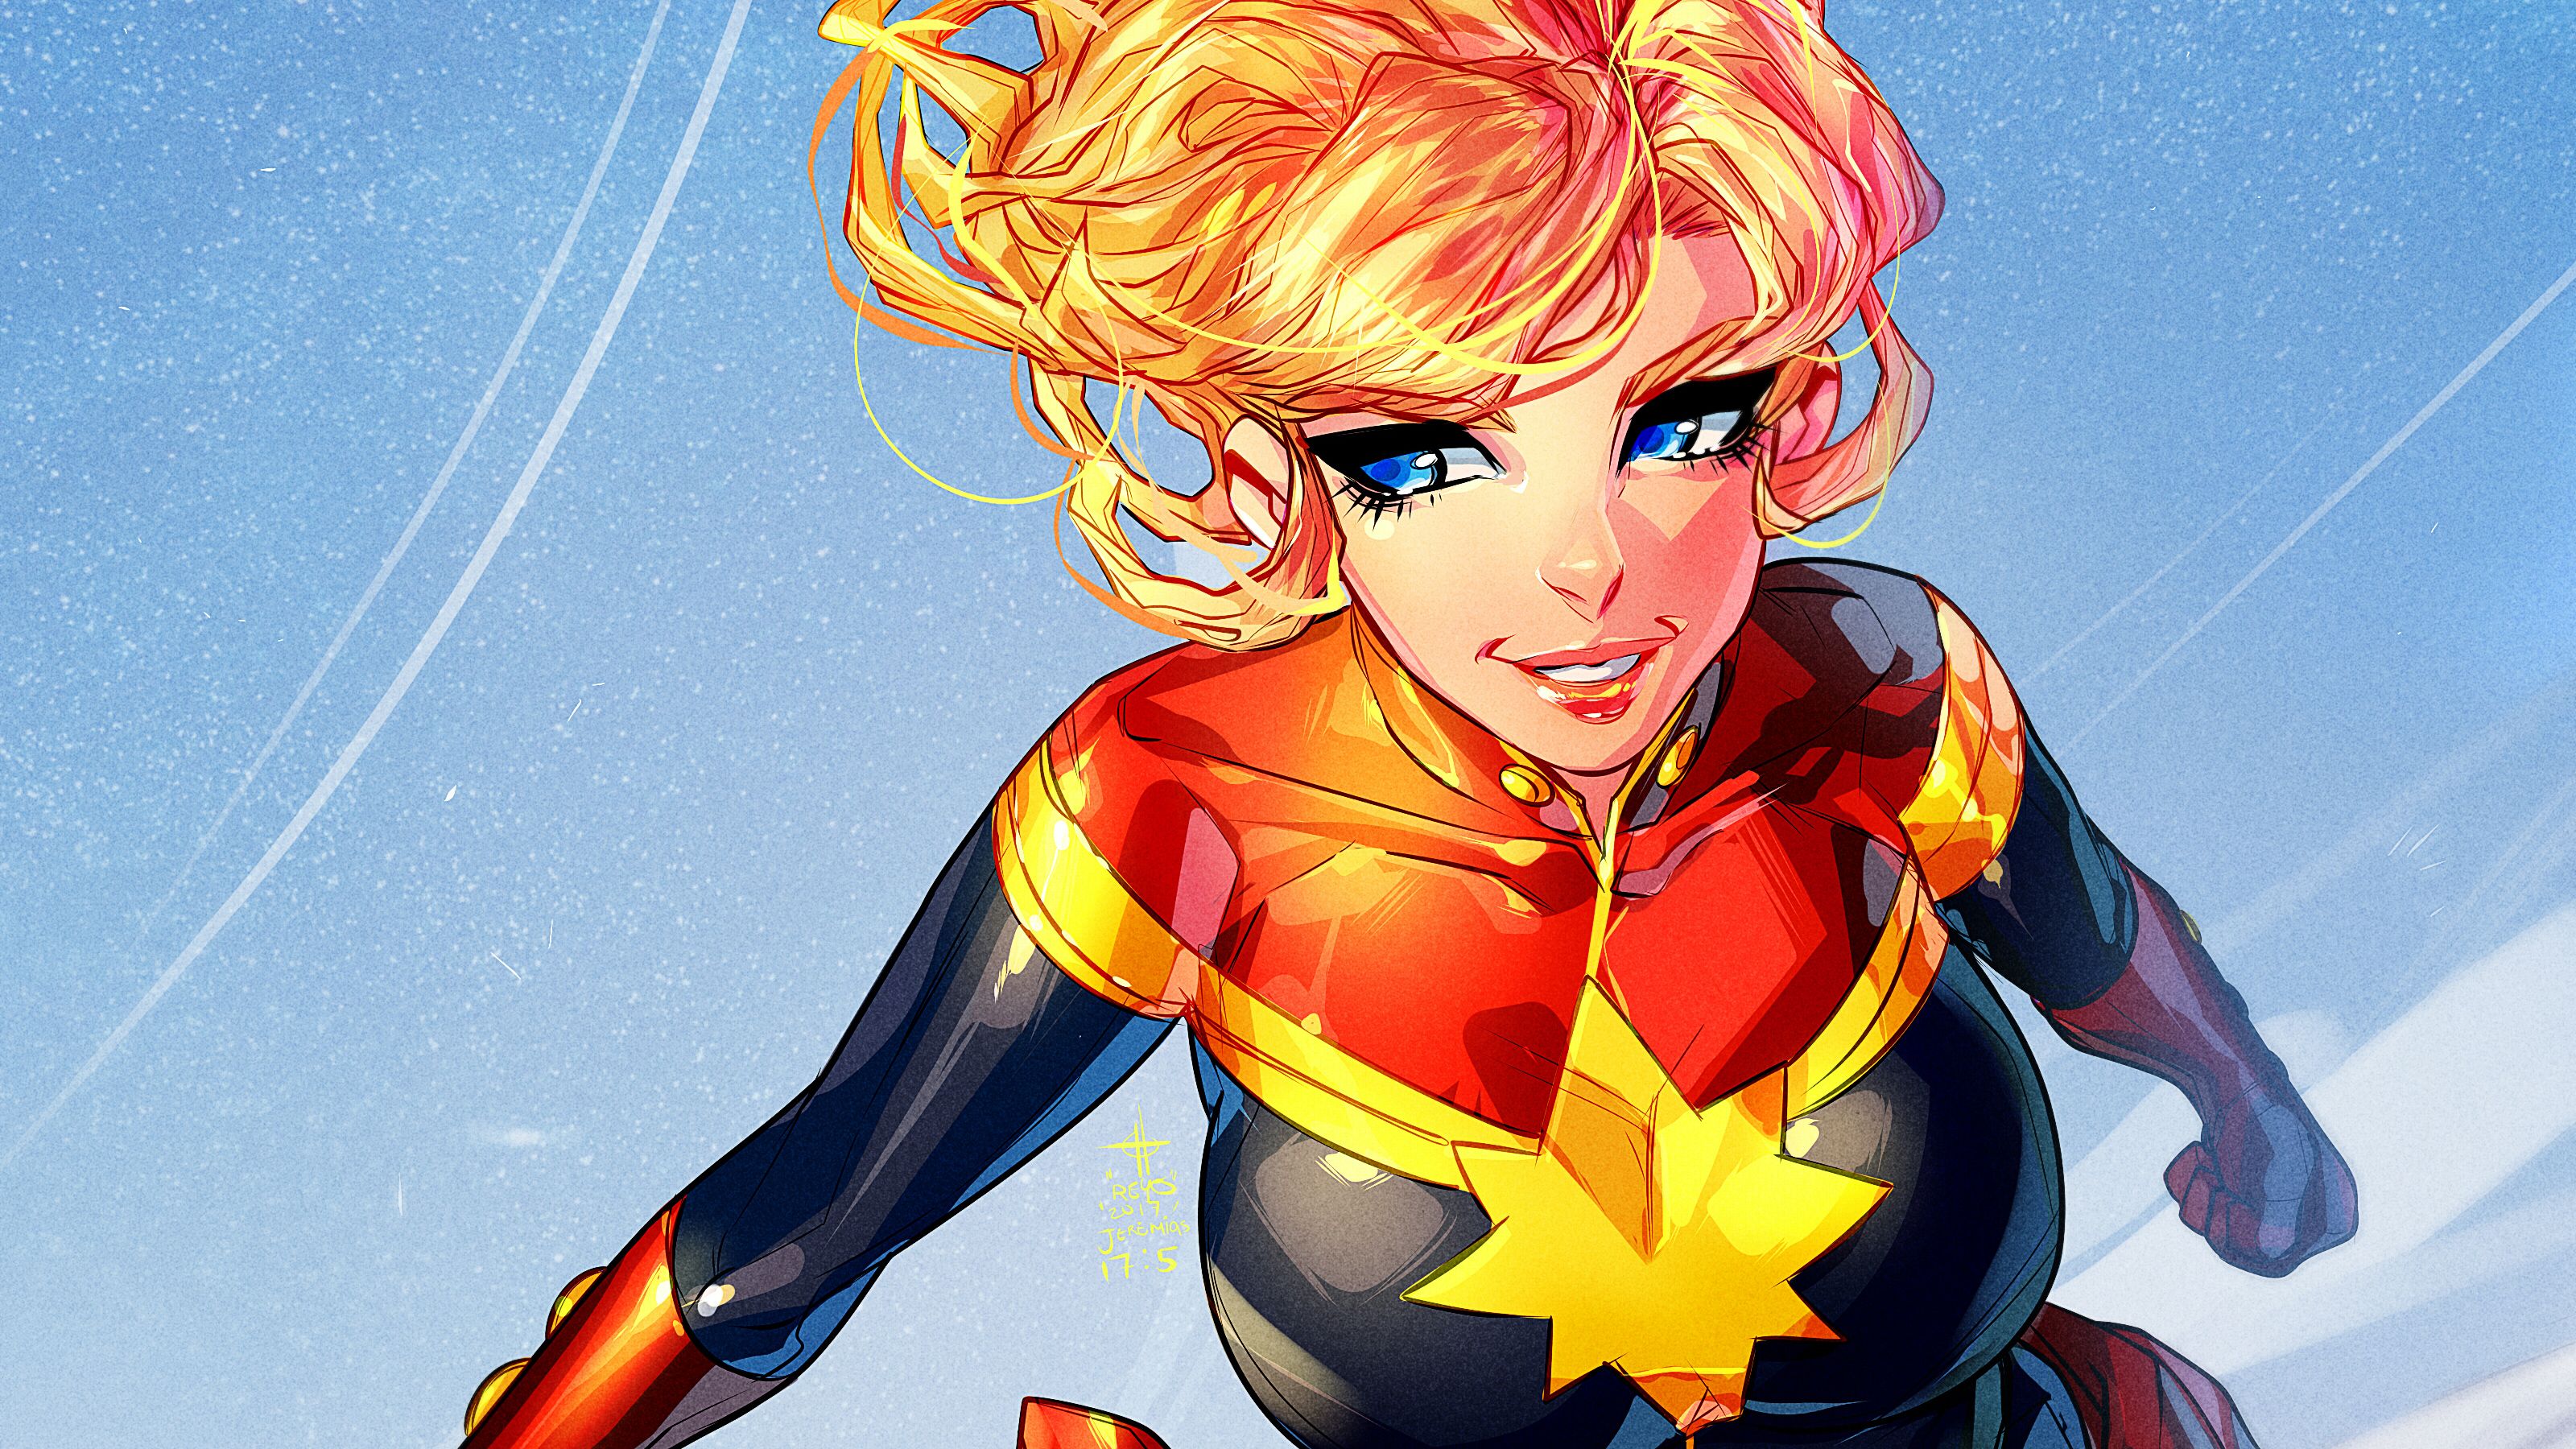 Captain Marvel Cute Art, HD Superheroes, 4k Wallpaper, Image, Background, Photo and Picture